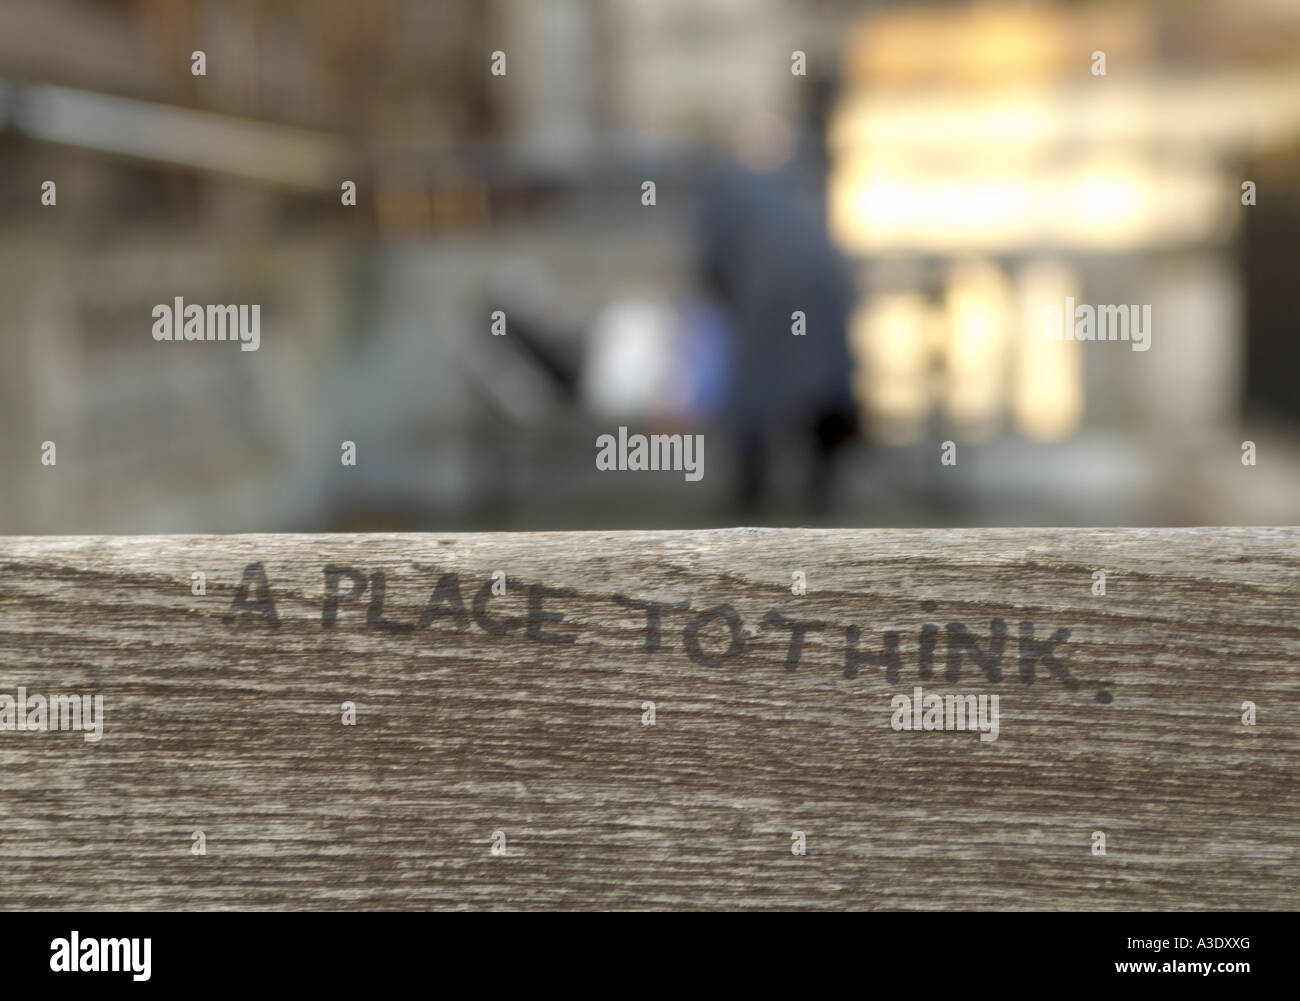 A place to think engraved in a park bench Stock Photo